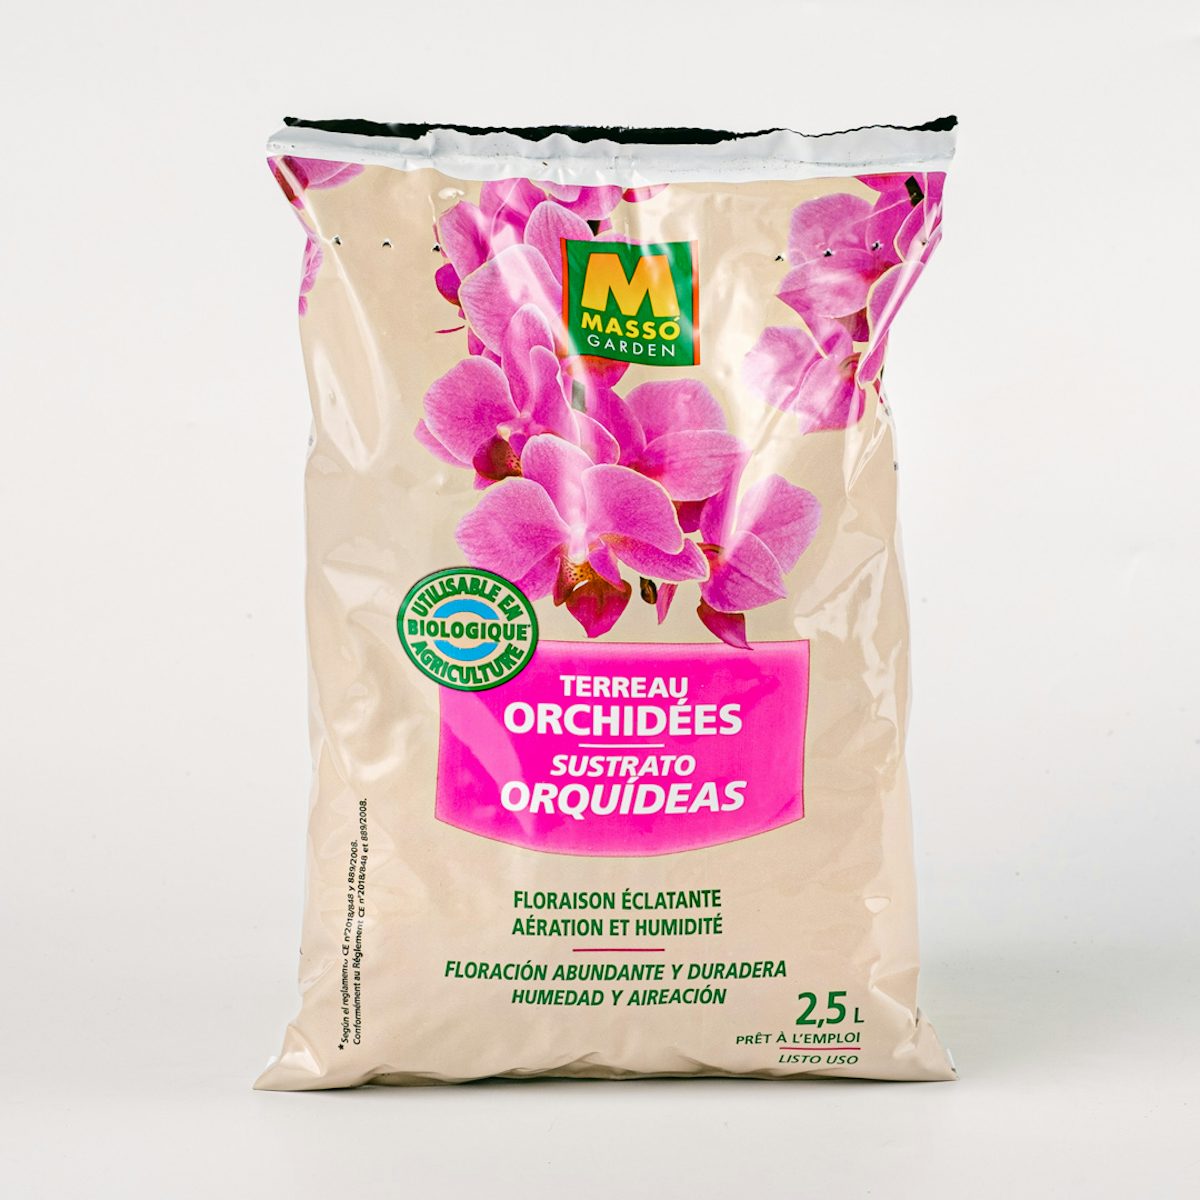 Substrate for Orchids